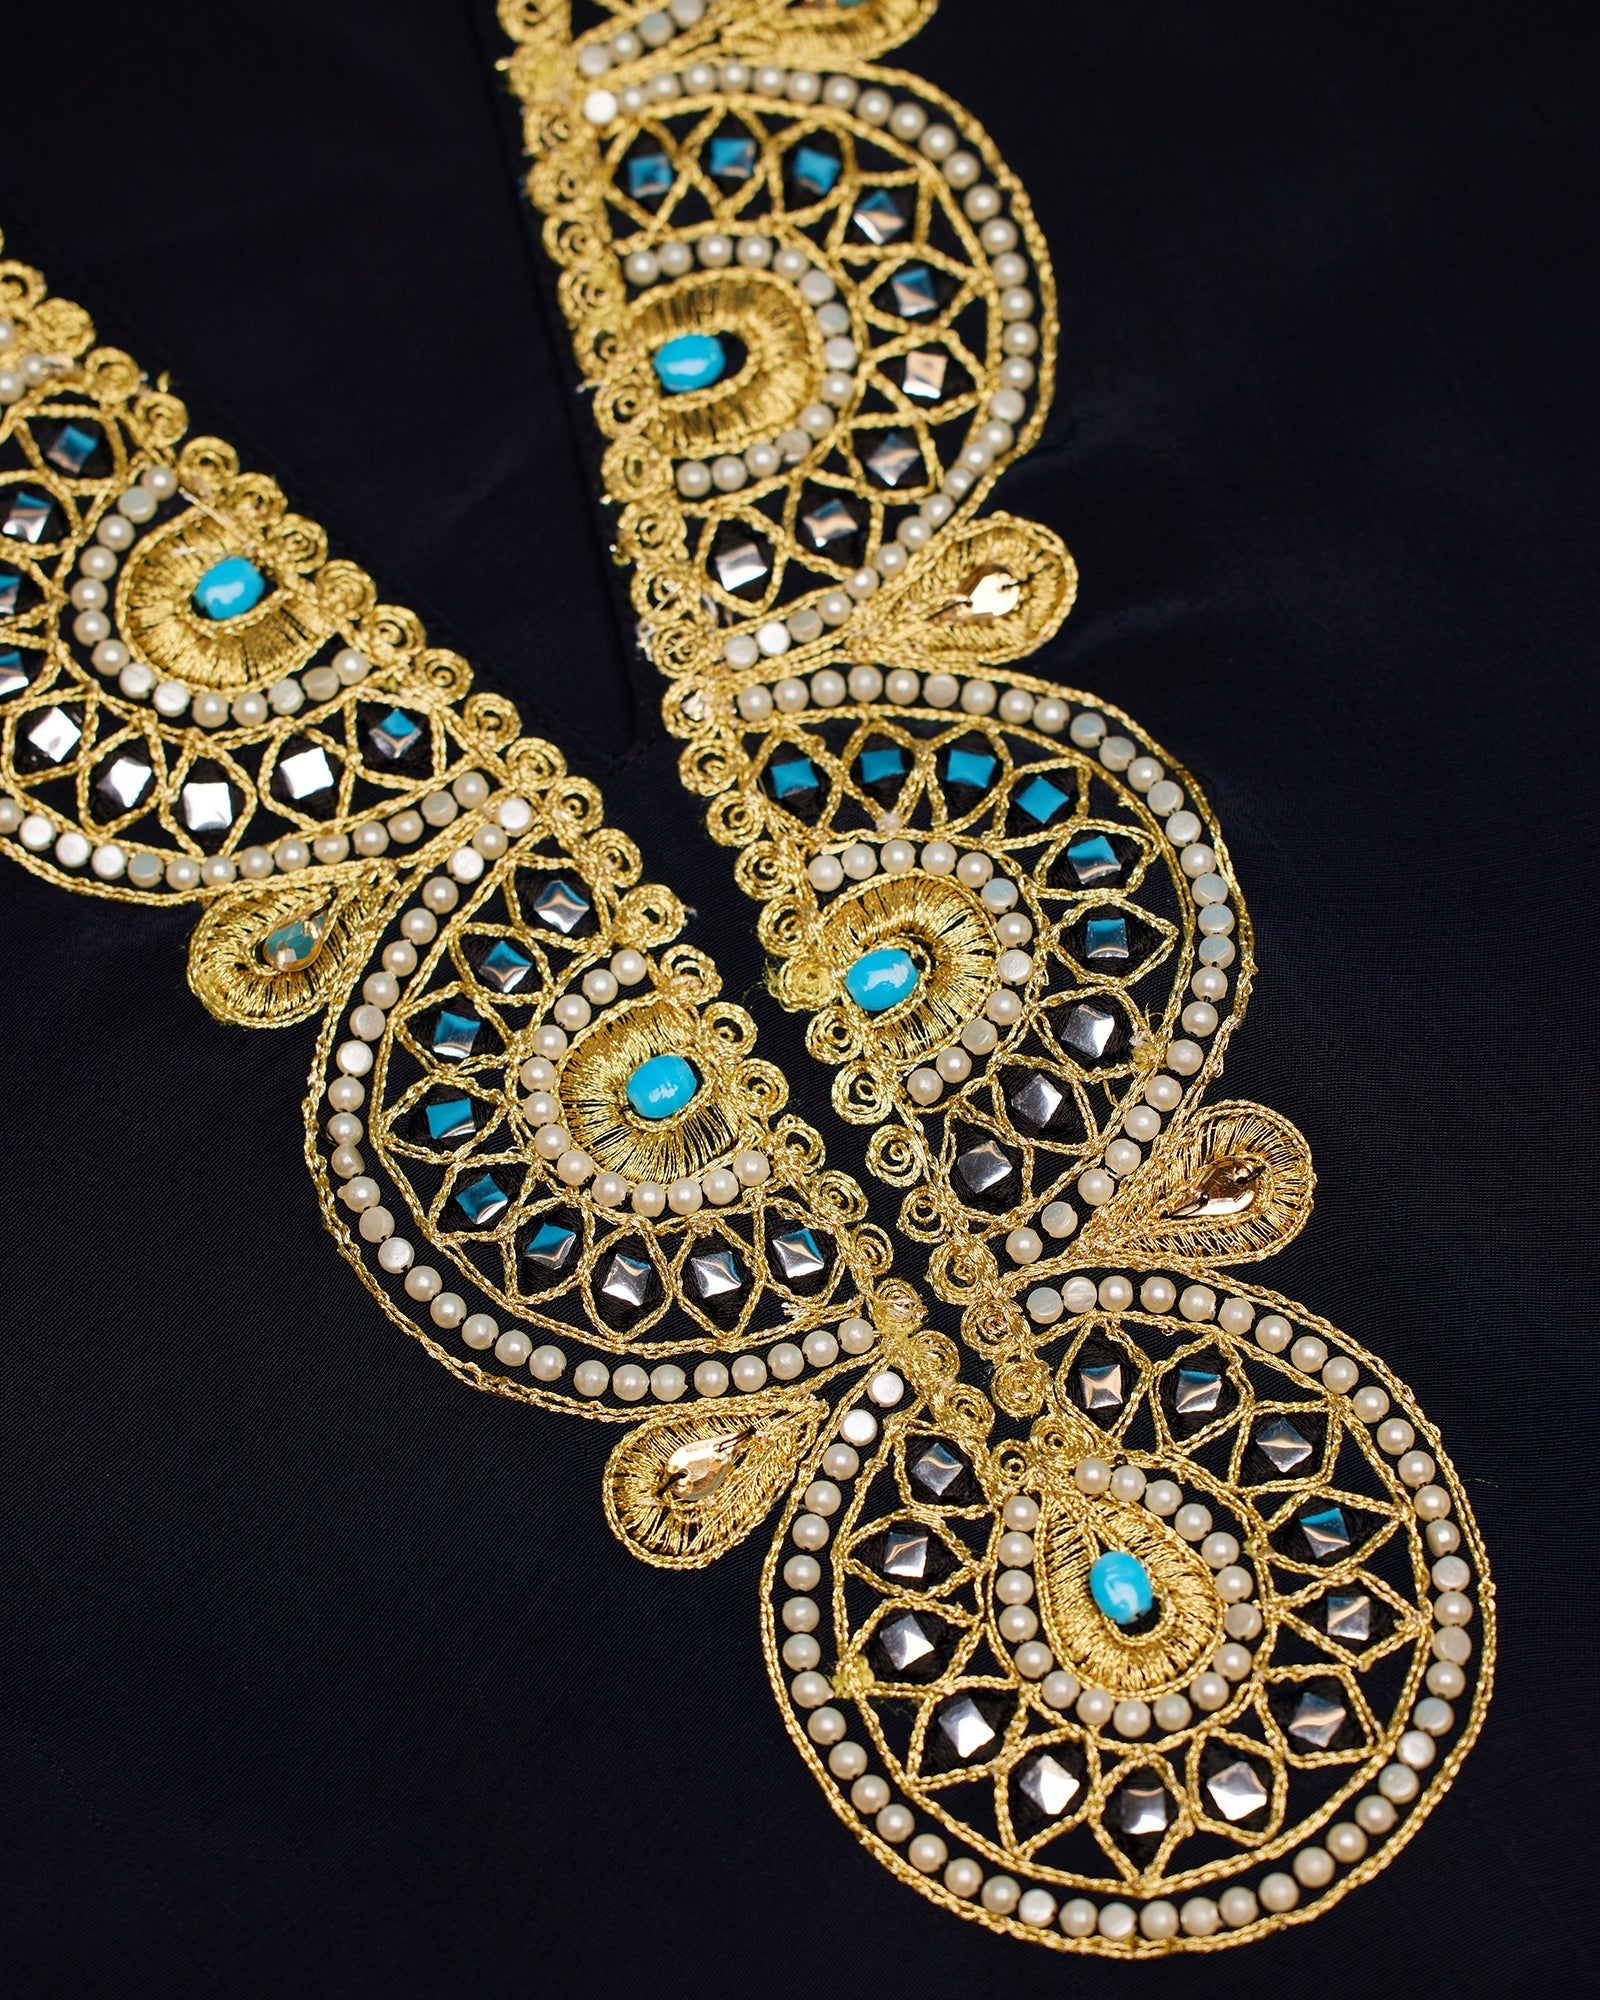 Noor Long Black Tunic Dress with Gold Embellishment-Detail of Gold and Turquoise Embellishment